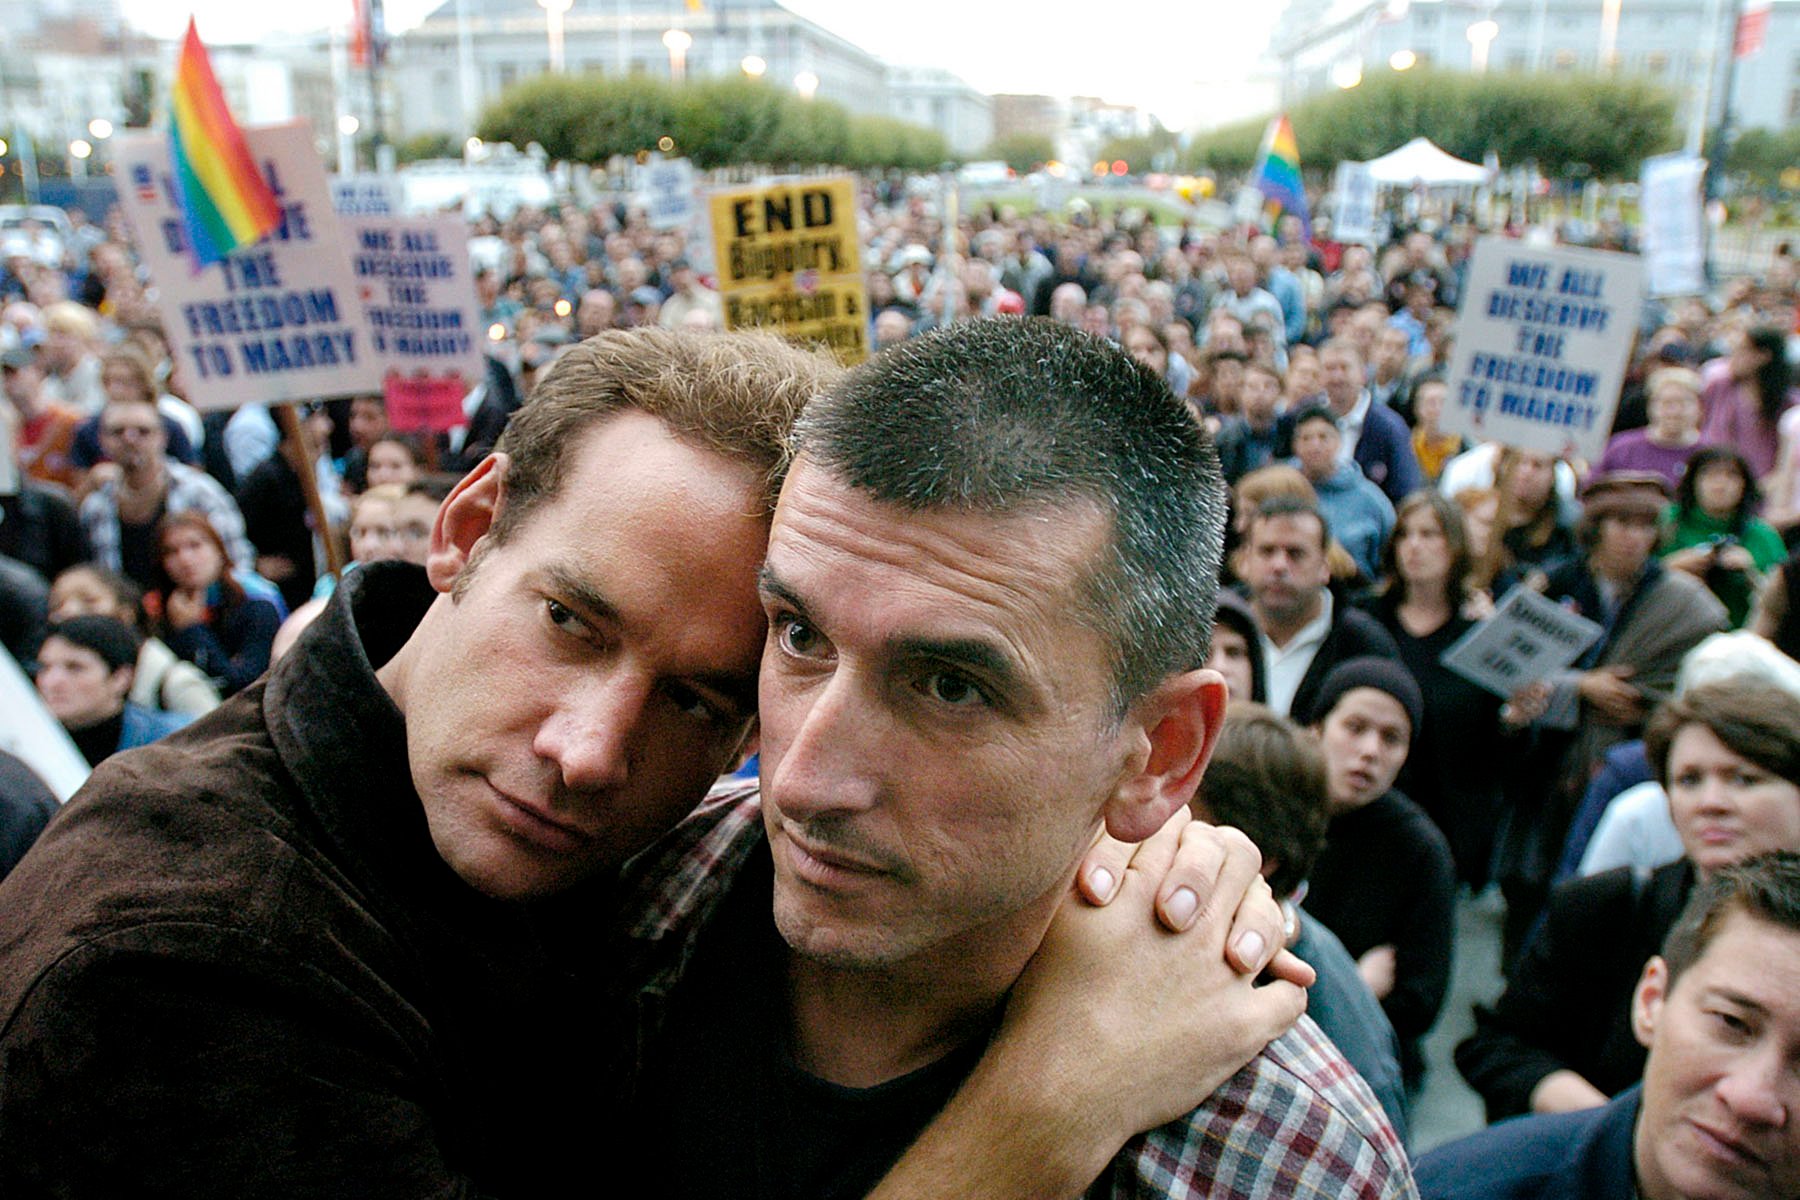 A couple embraces as people rally in support of gay marriage in San Francisco.